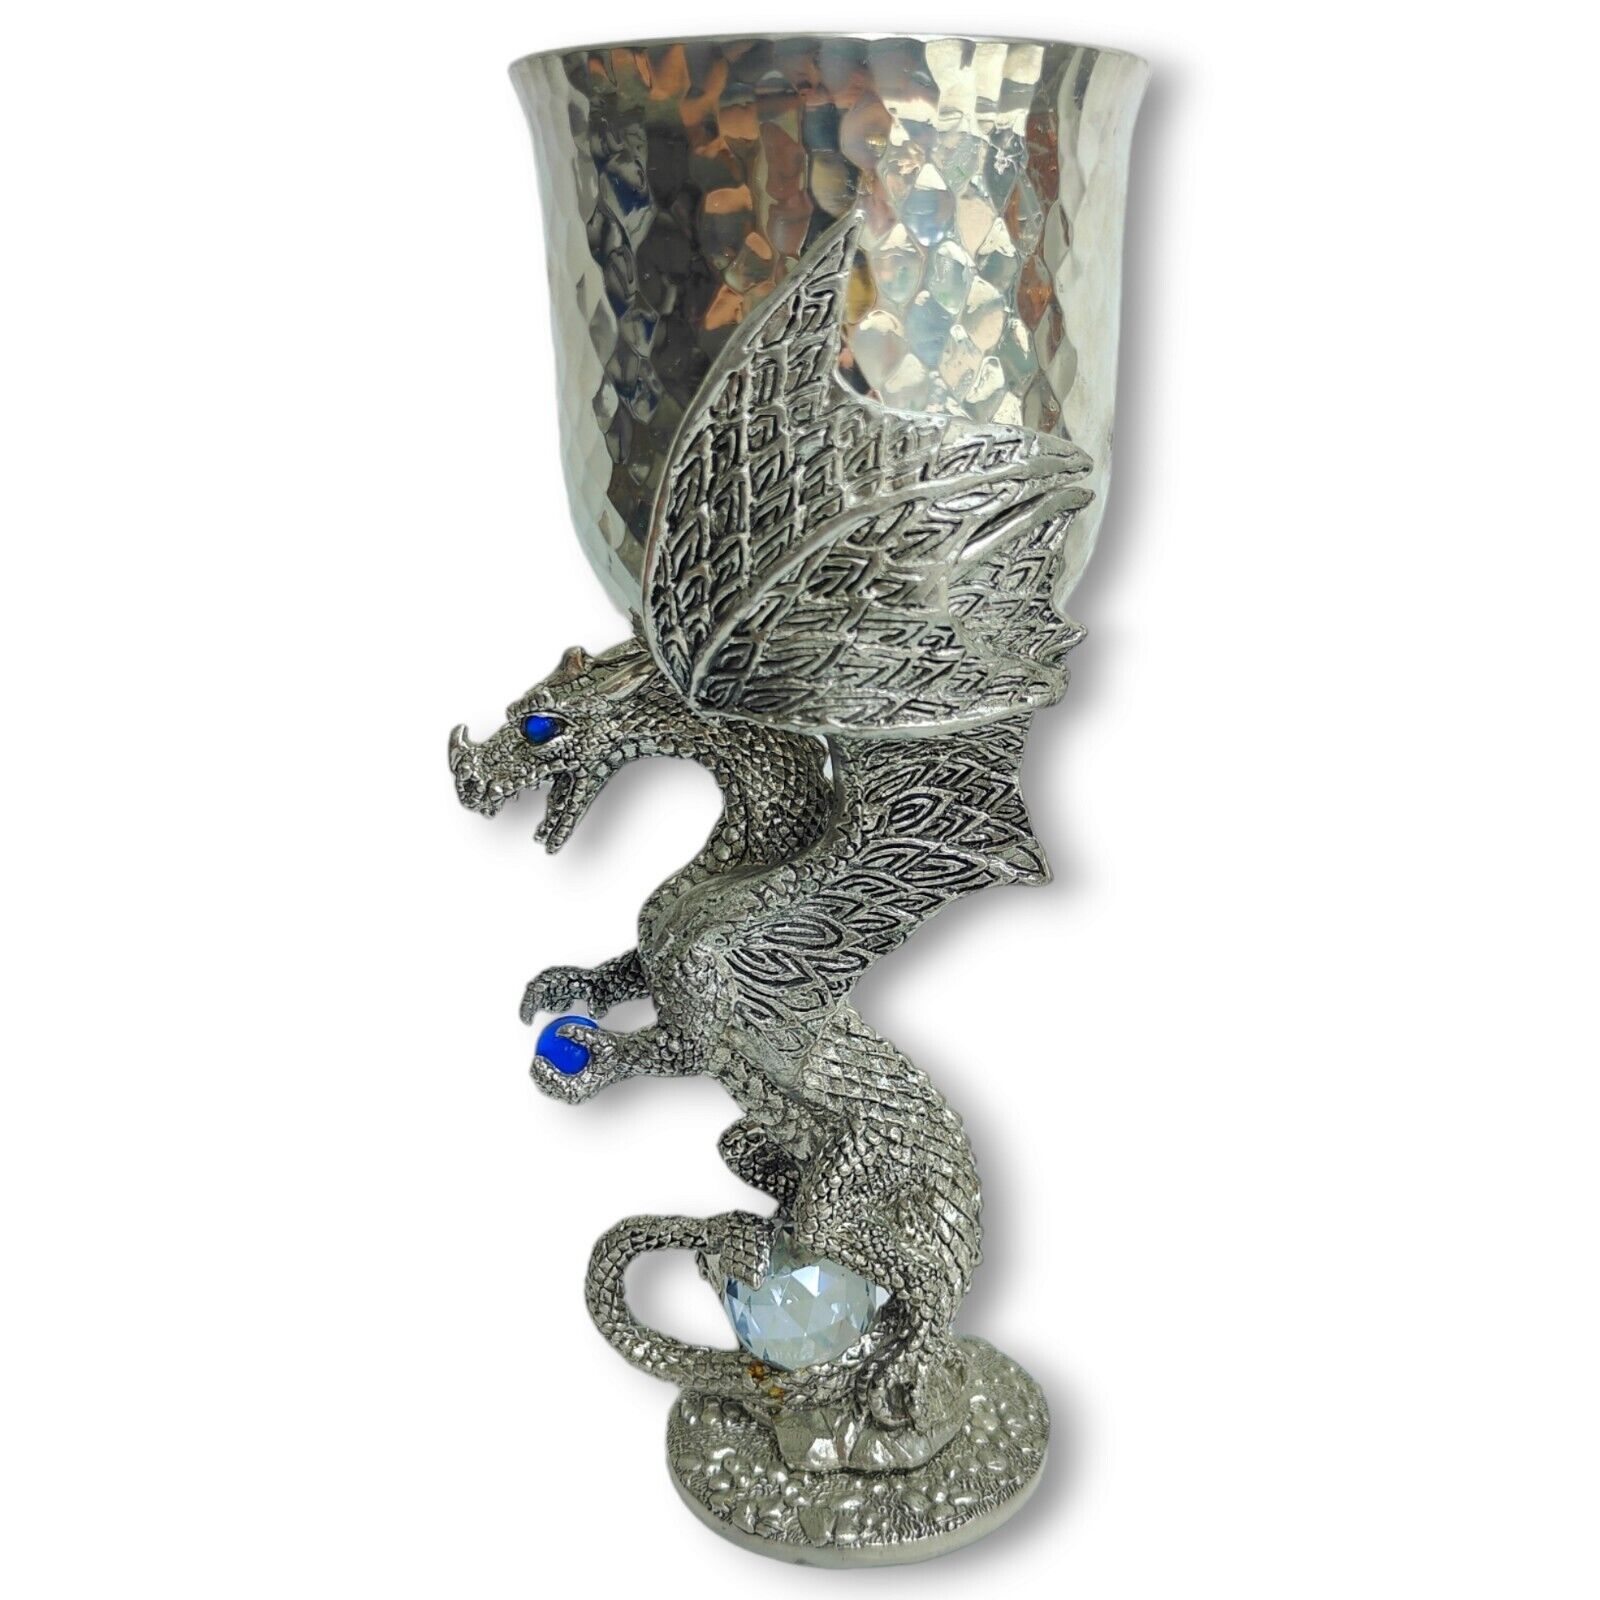 Fellowship Foundry Limited Edition Platinum Hammered Crystal Dragon Goblet